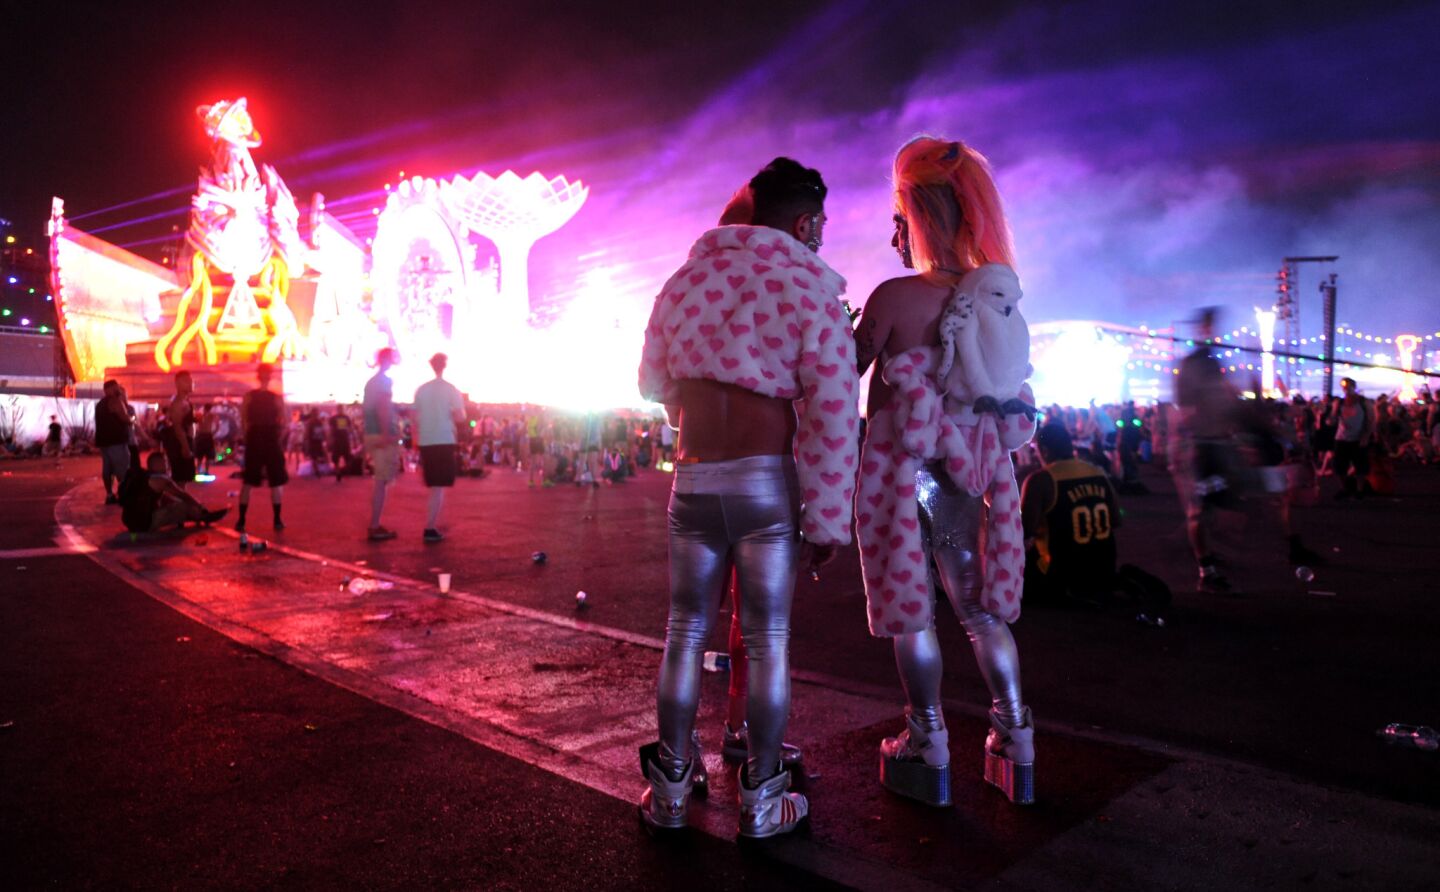 Fans watch a performance on the Kinetic Field stage during the Electric Daisy Carnival in Las Vegas on June 17.